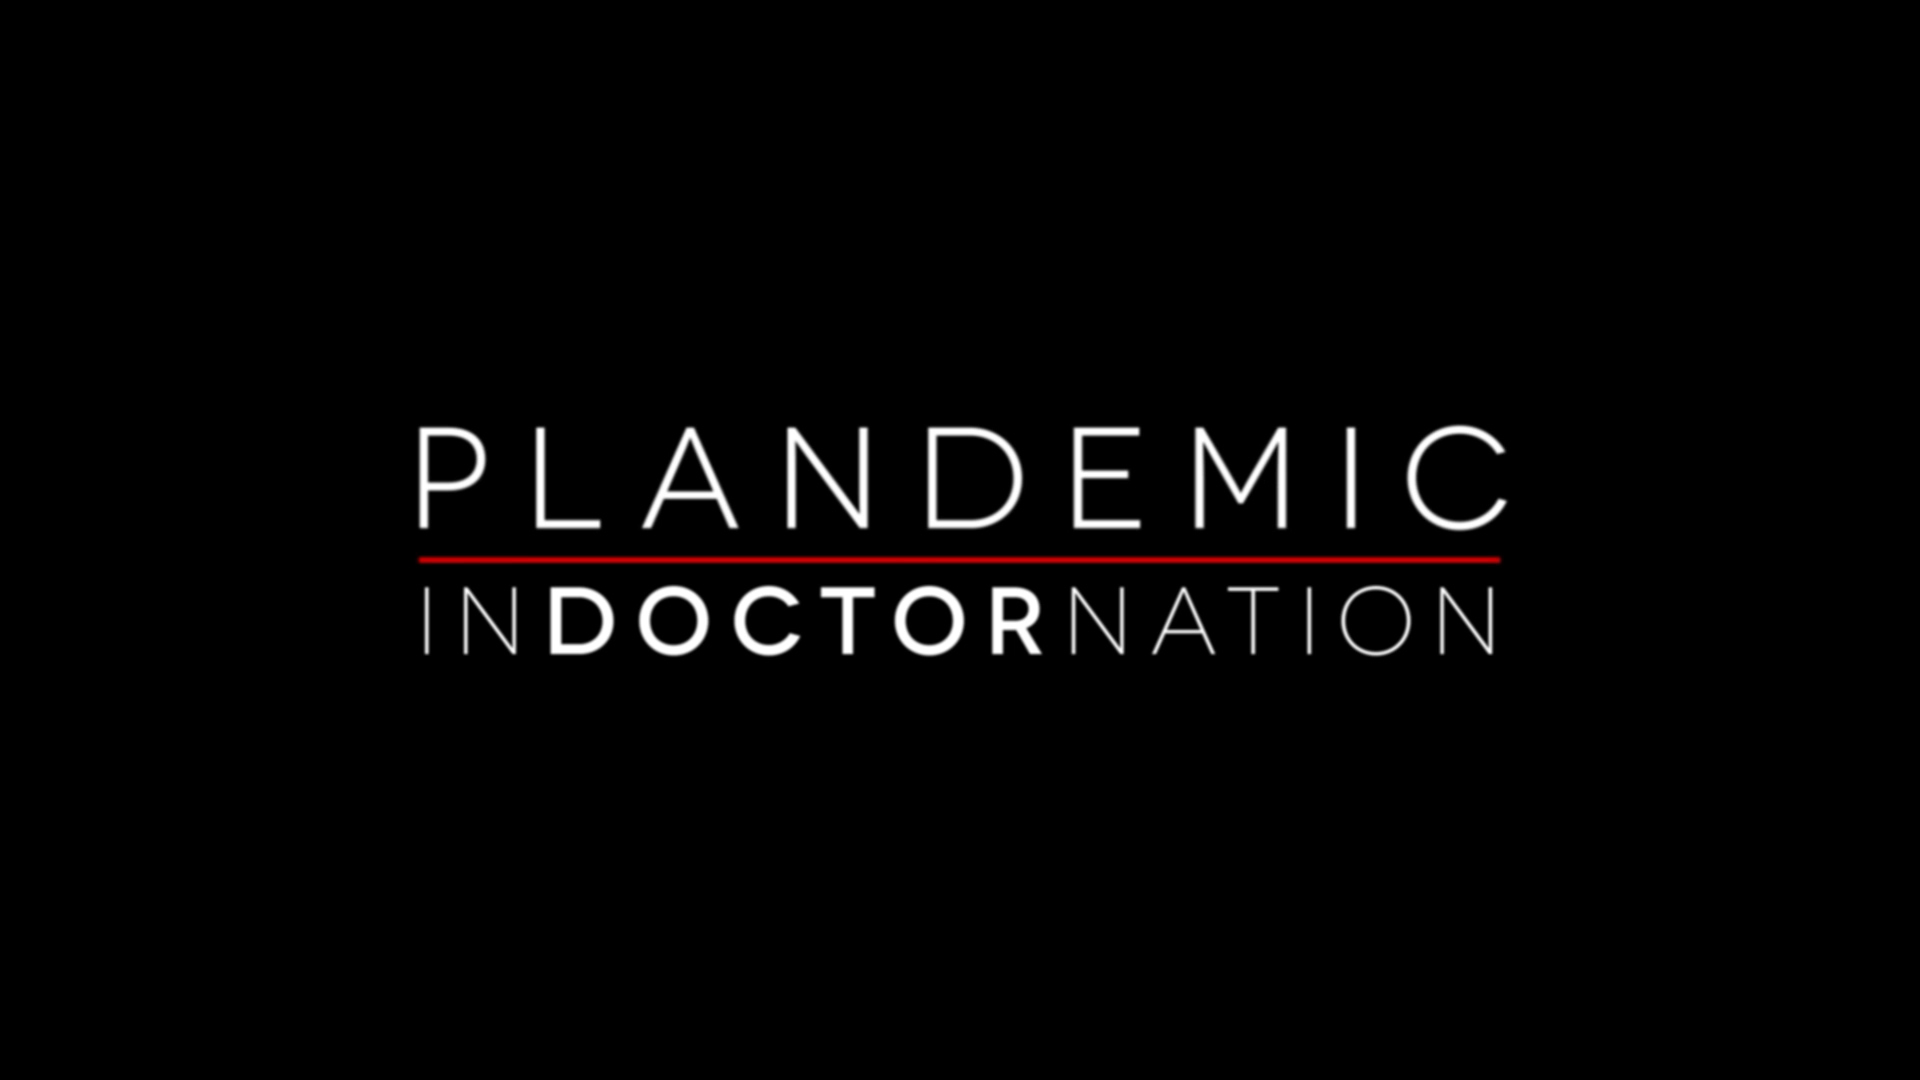 Image: Plandemic II: inDOCTORnation film released – here are the most damning outtakes that expose the criminal fraud of Fauci, the WHO and the CDC